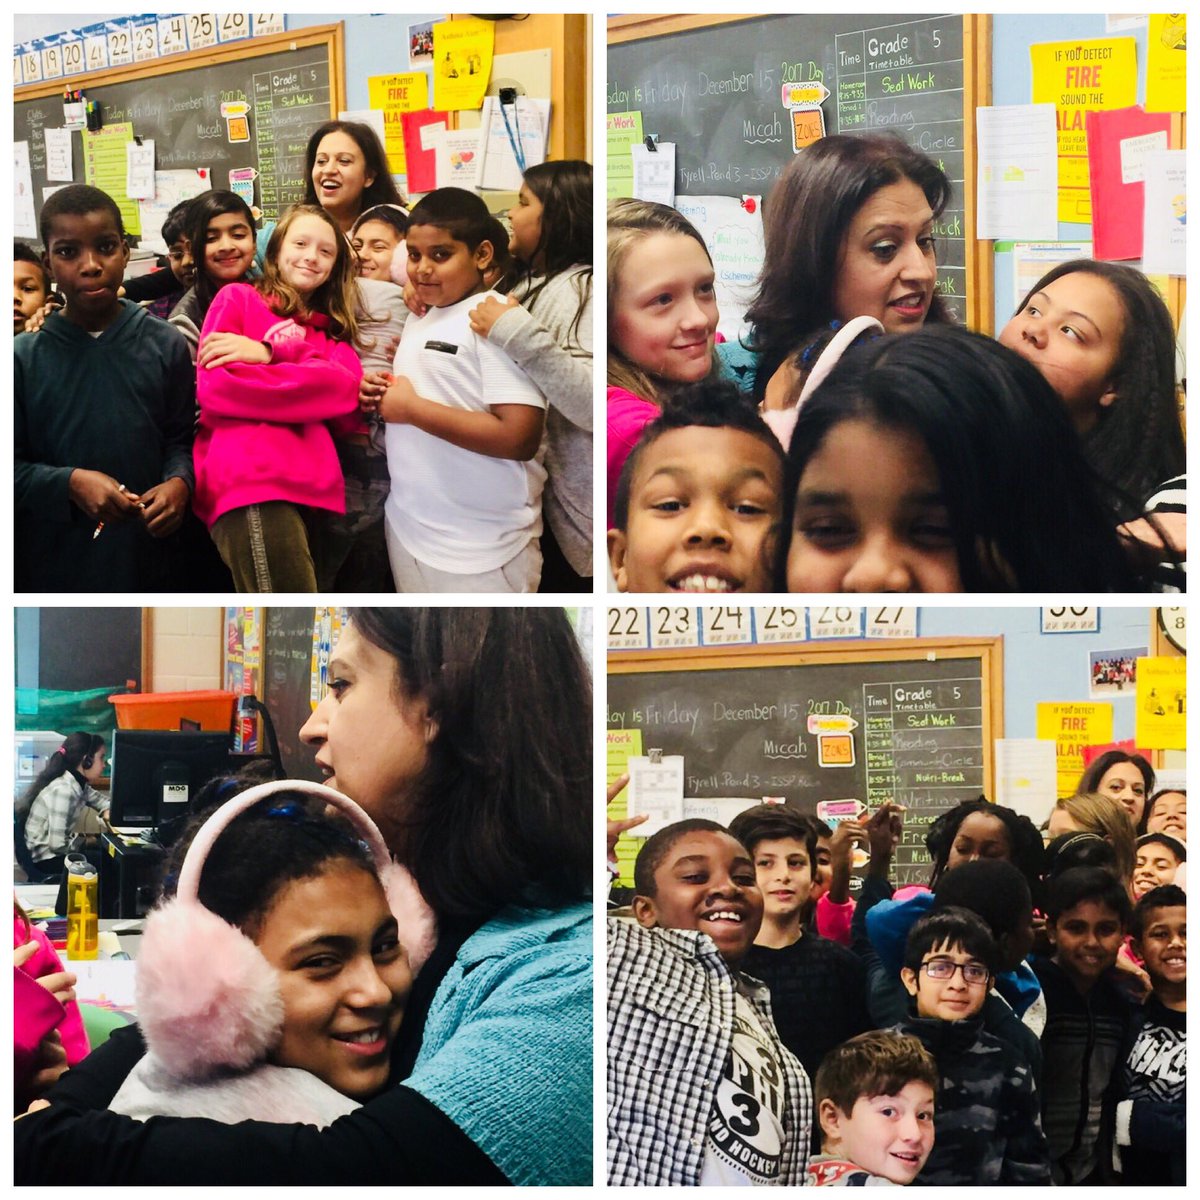 One more week before saying goodbye to these amazing kids @Agnesbears keep that beautiful light shining! TU to my Ts for capturing these priceless moments.